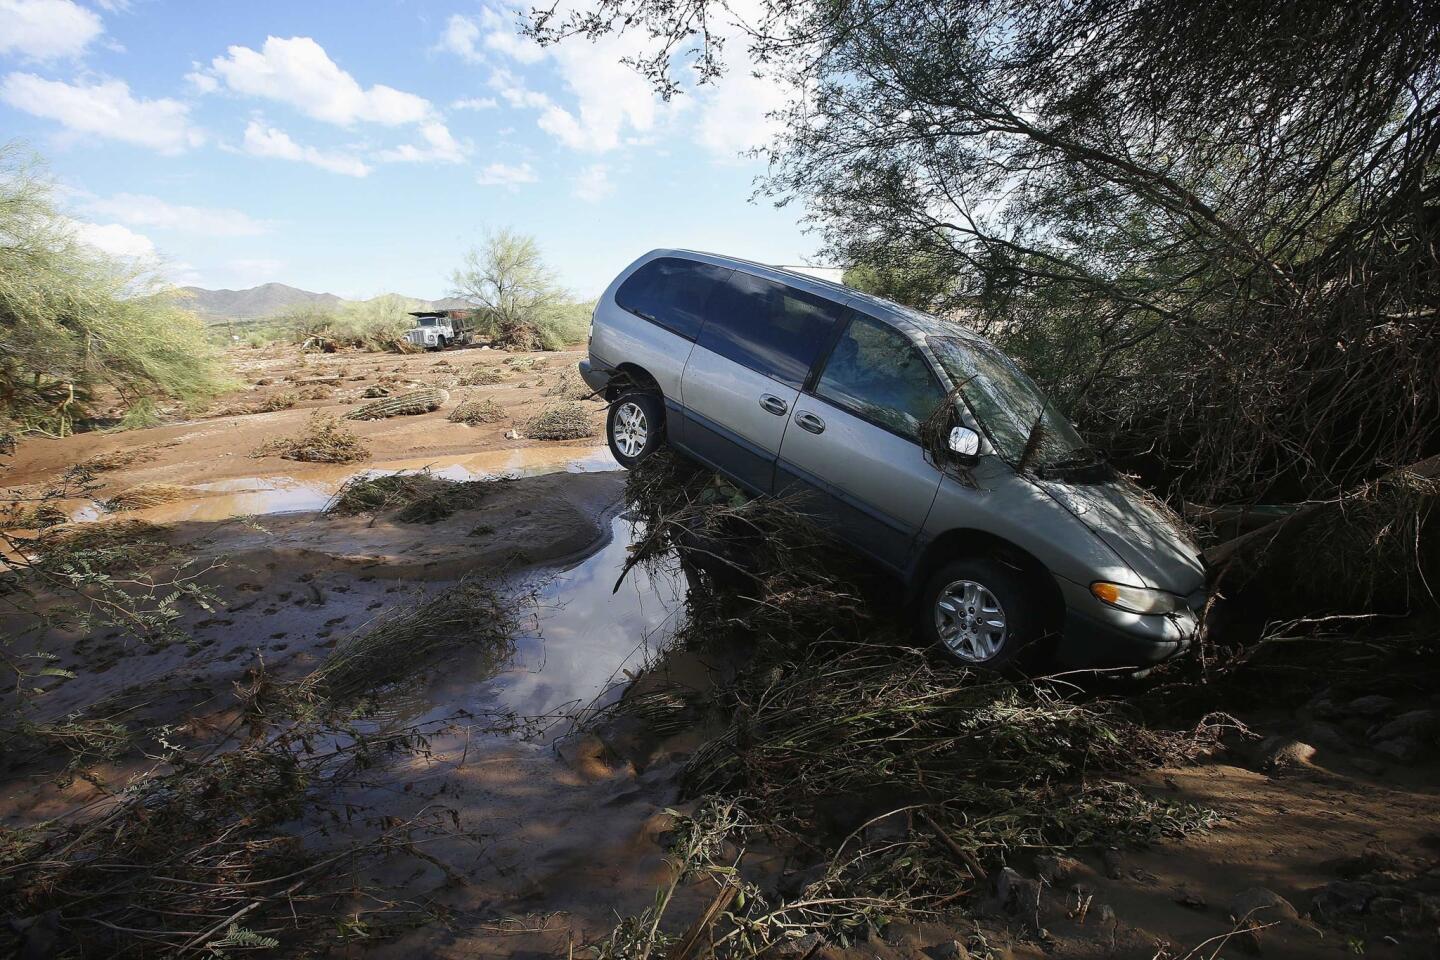 Flash flooding pushed a vehicle onto debris when rising waters overran Skunk Creek on Aug. 19 in New River, Ariz.